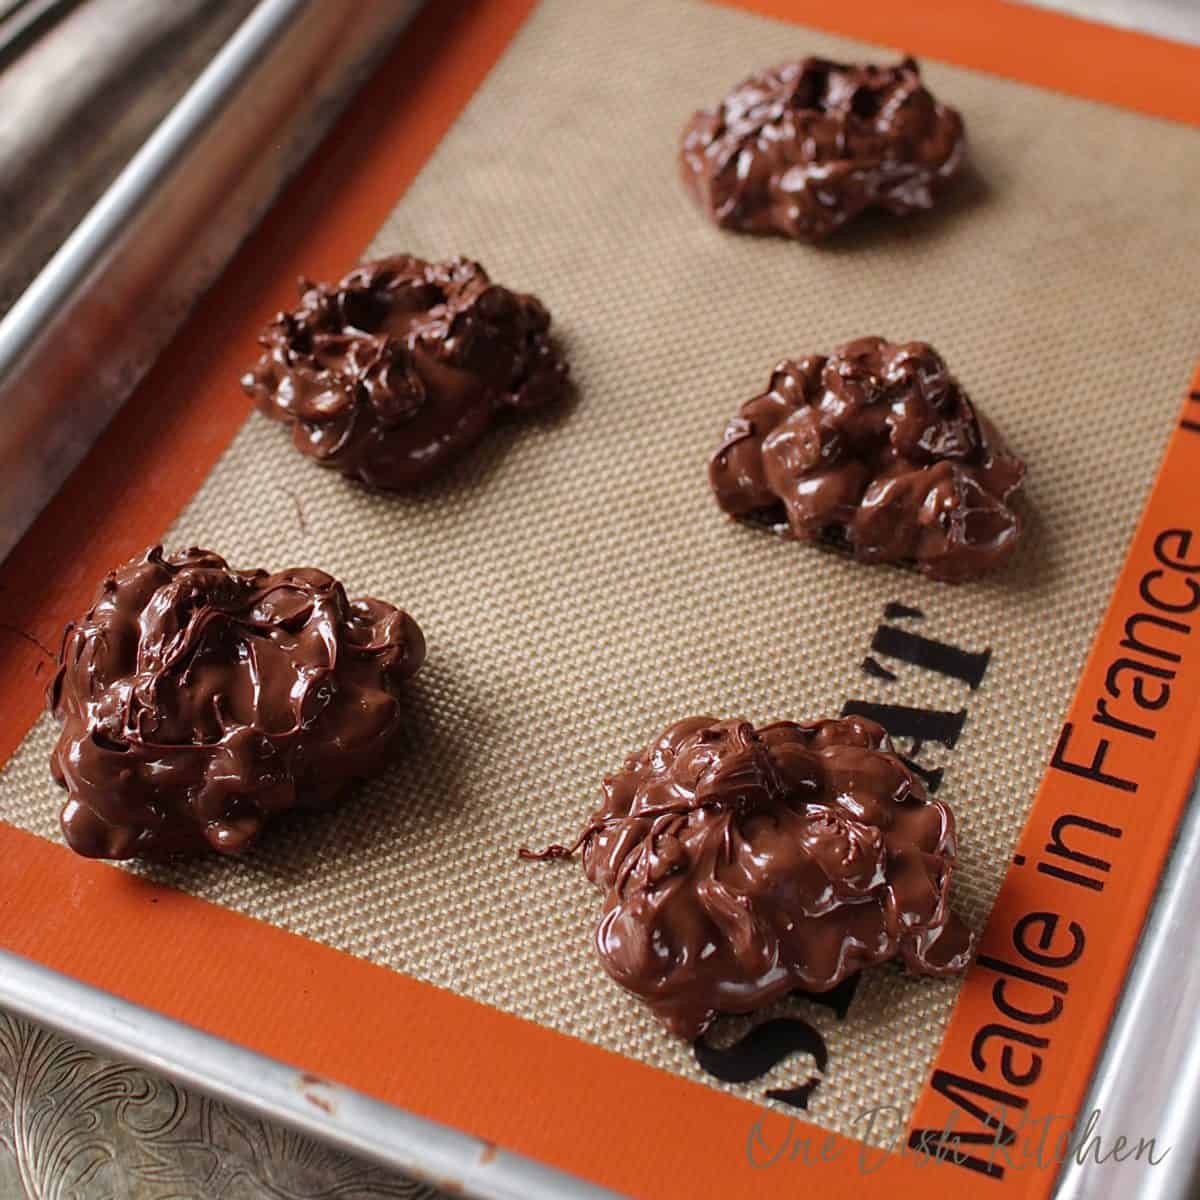 Melted chocolate mixture on a lined baking sheet making five candies.